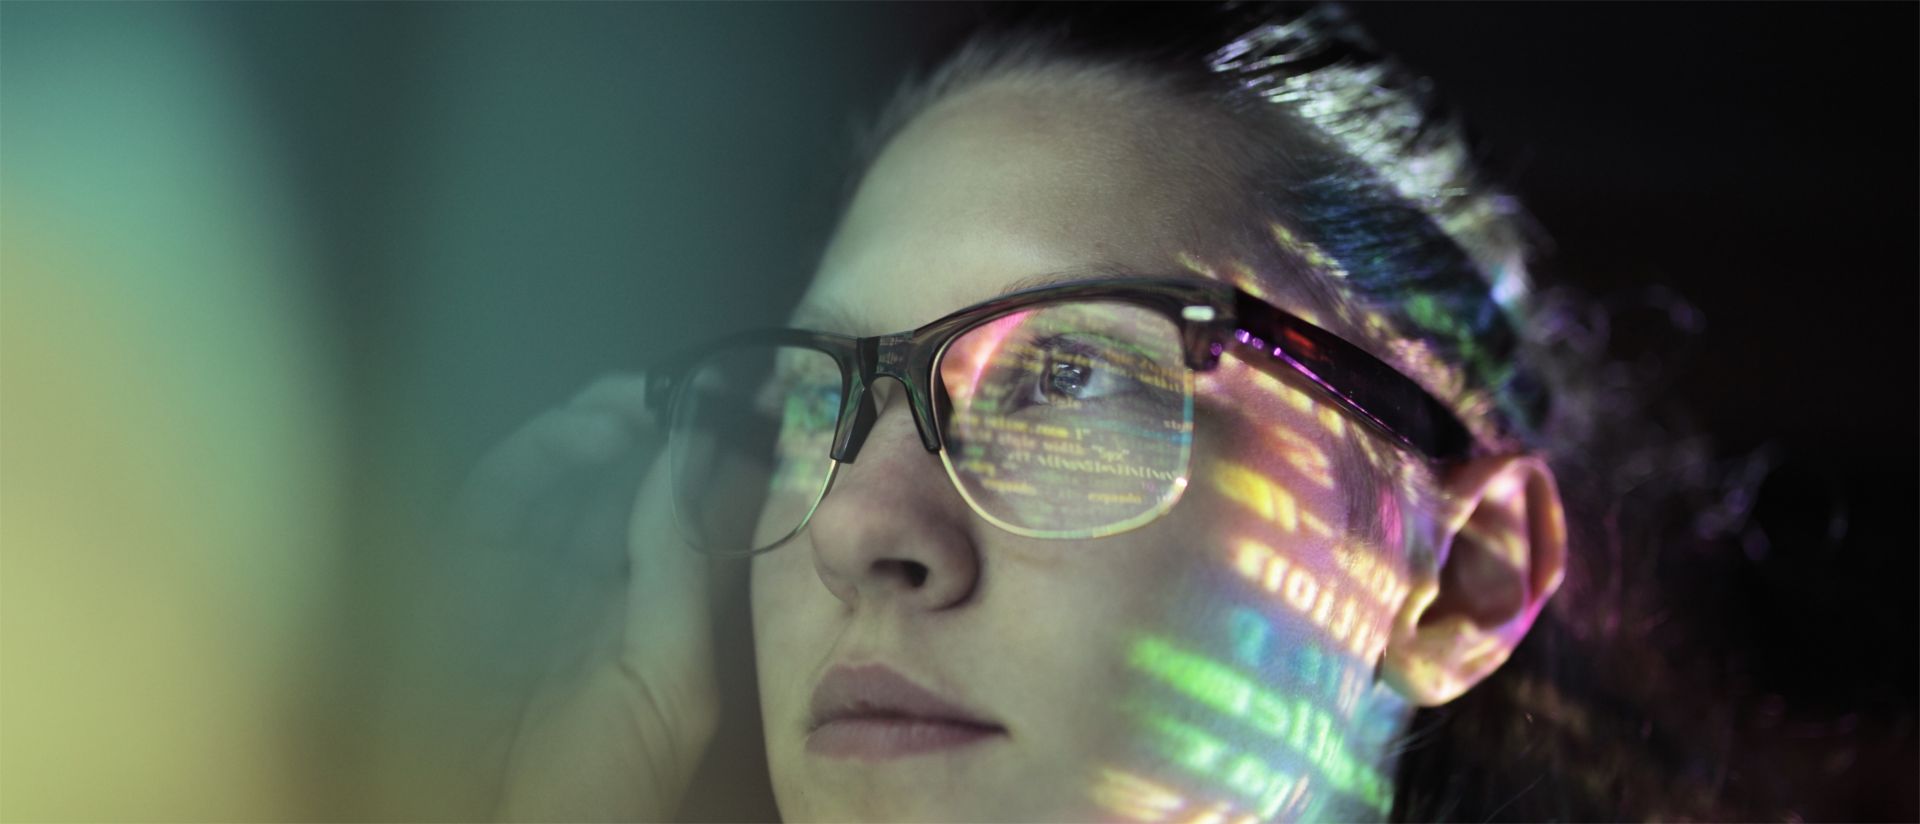 A girl’s portrait wearing glasses and light reflecting on her face